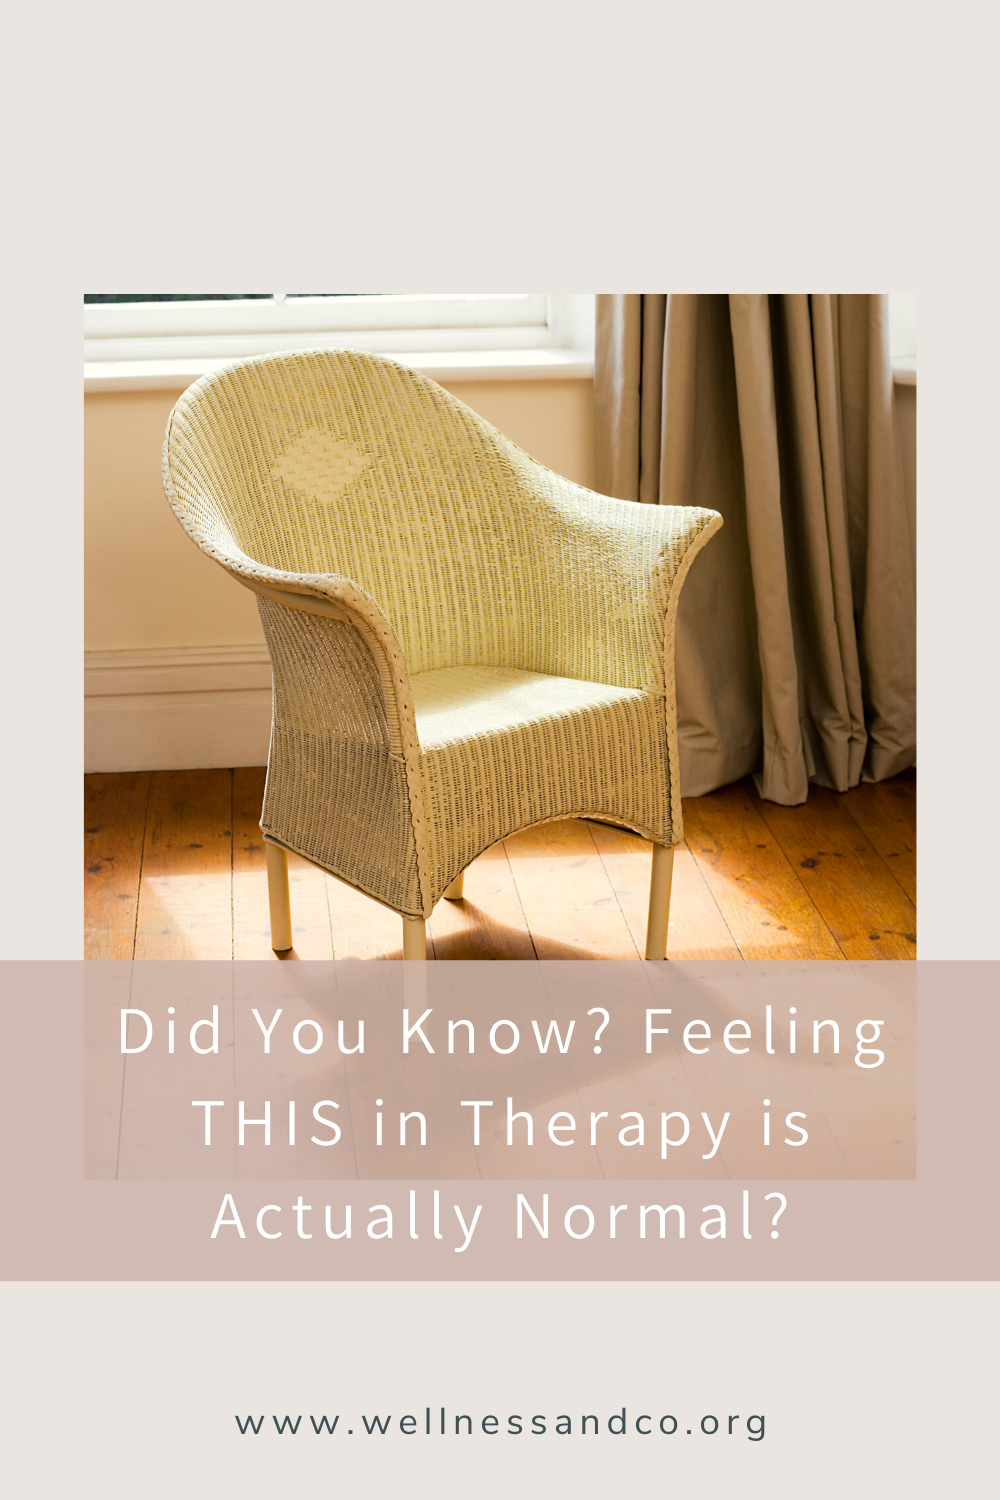 Did You Know? Feeling THIS in Therapy is Actually Normal? | Clients can feel a lot of emotions throughout the therapy process. This post gives an inside look, in poem form, into a common and normal emotion that typically emerges in therapy. Cheers!